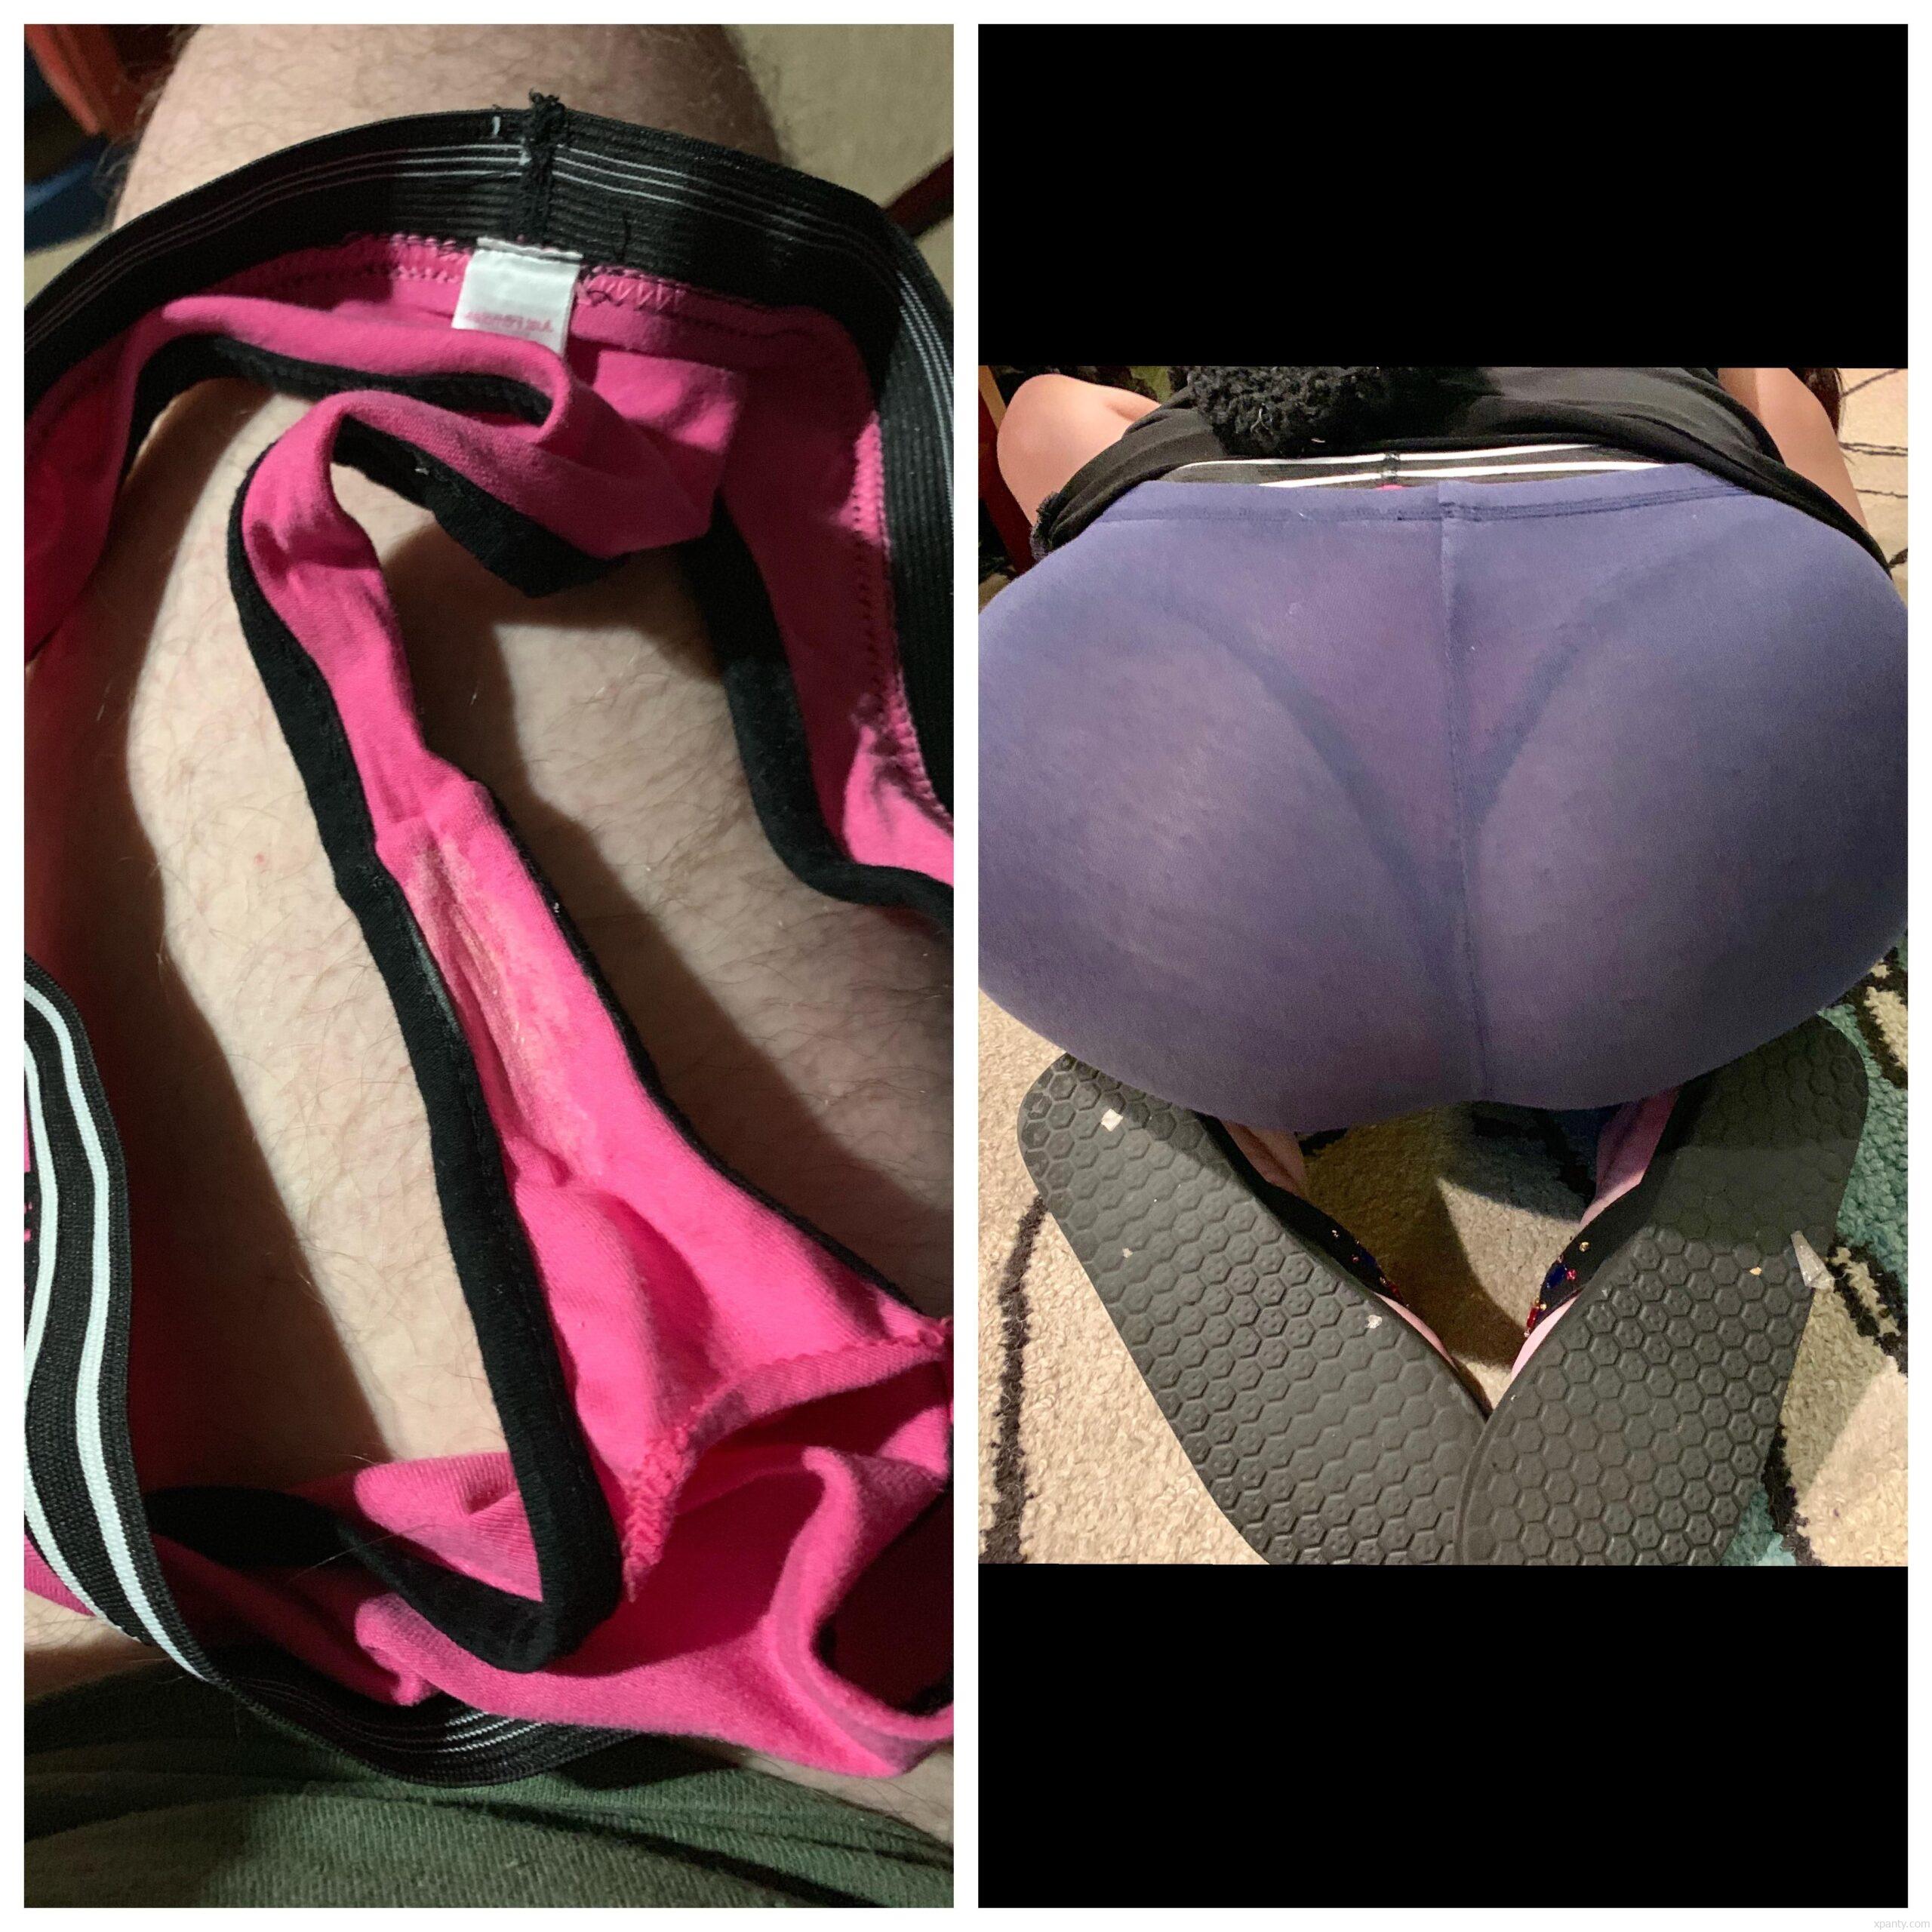 Pictures and videos for female panties fetishists